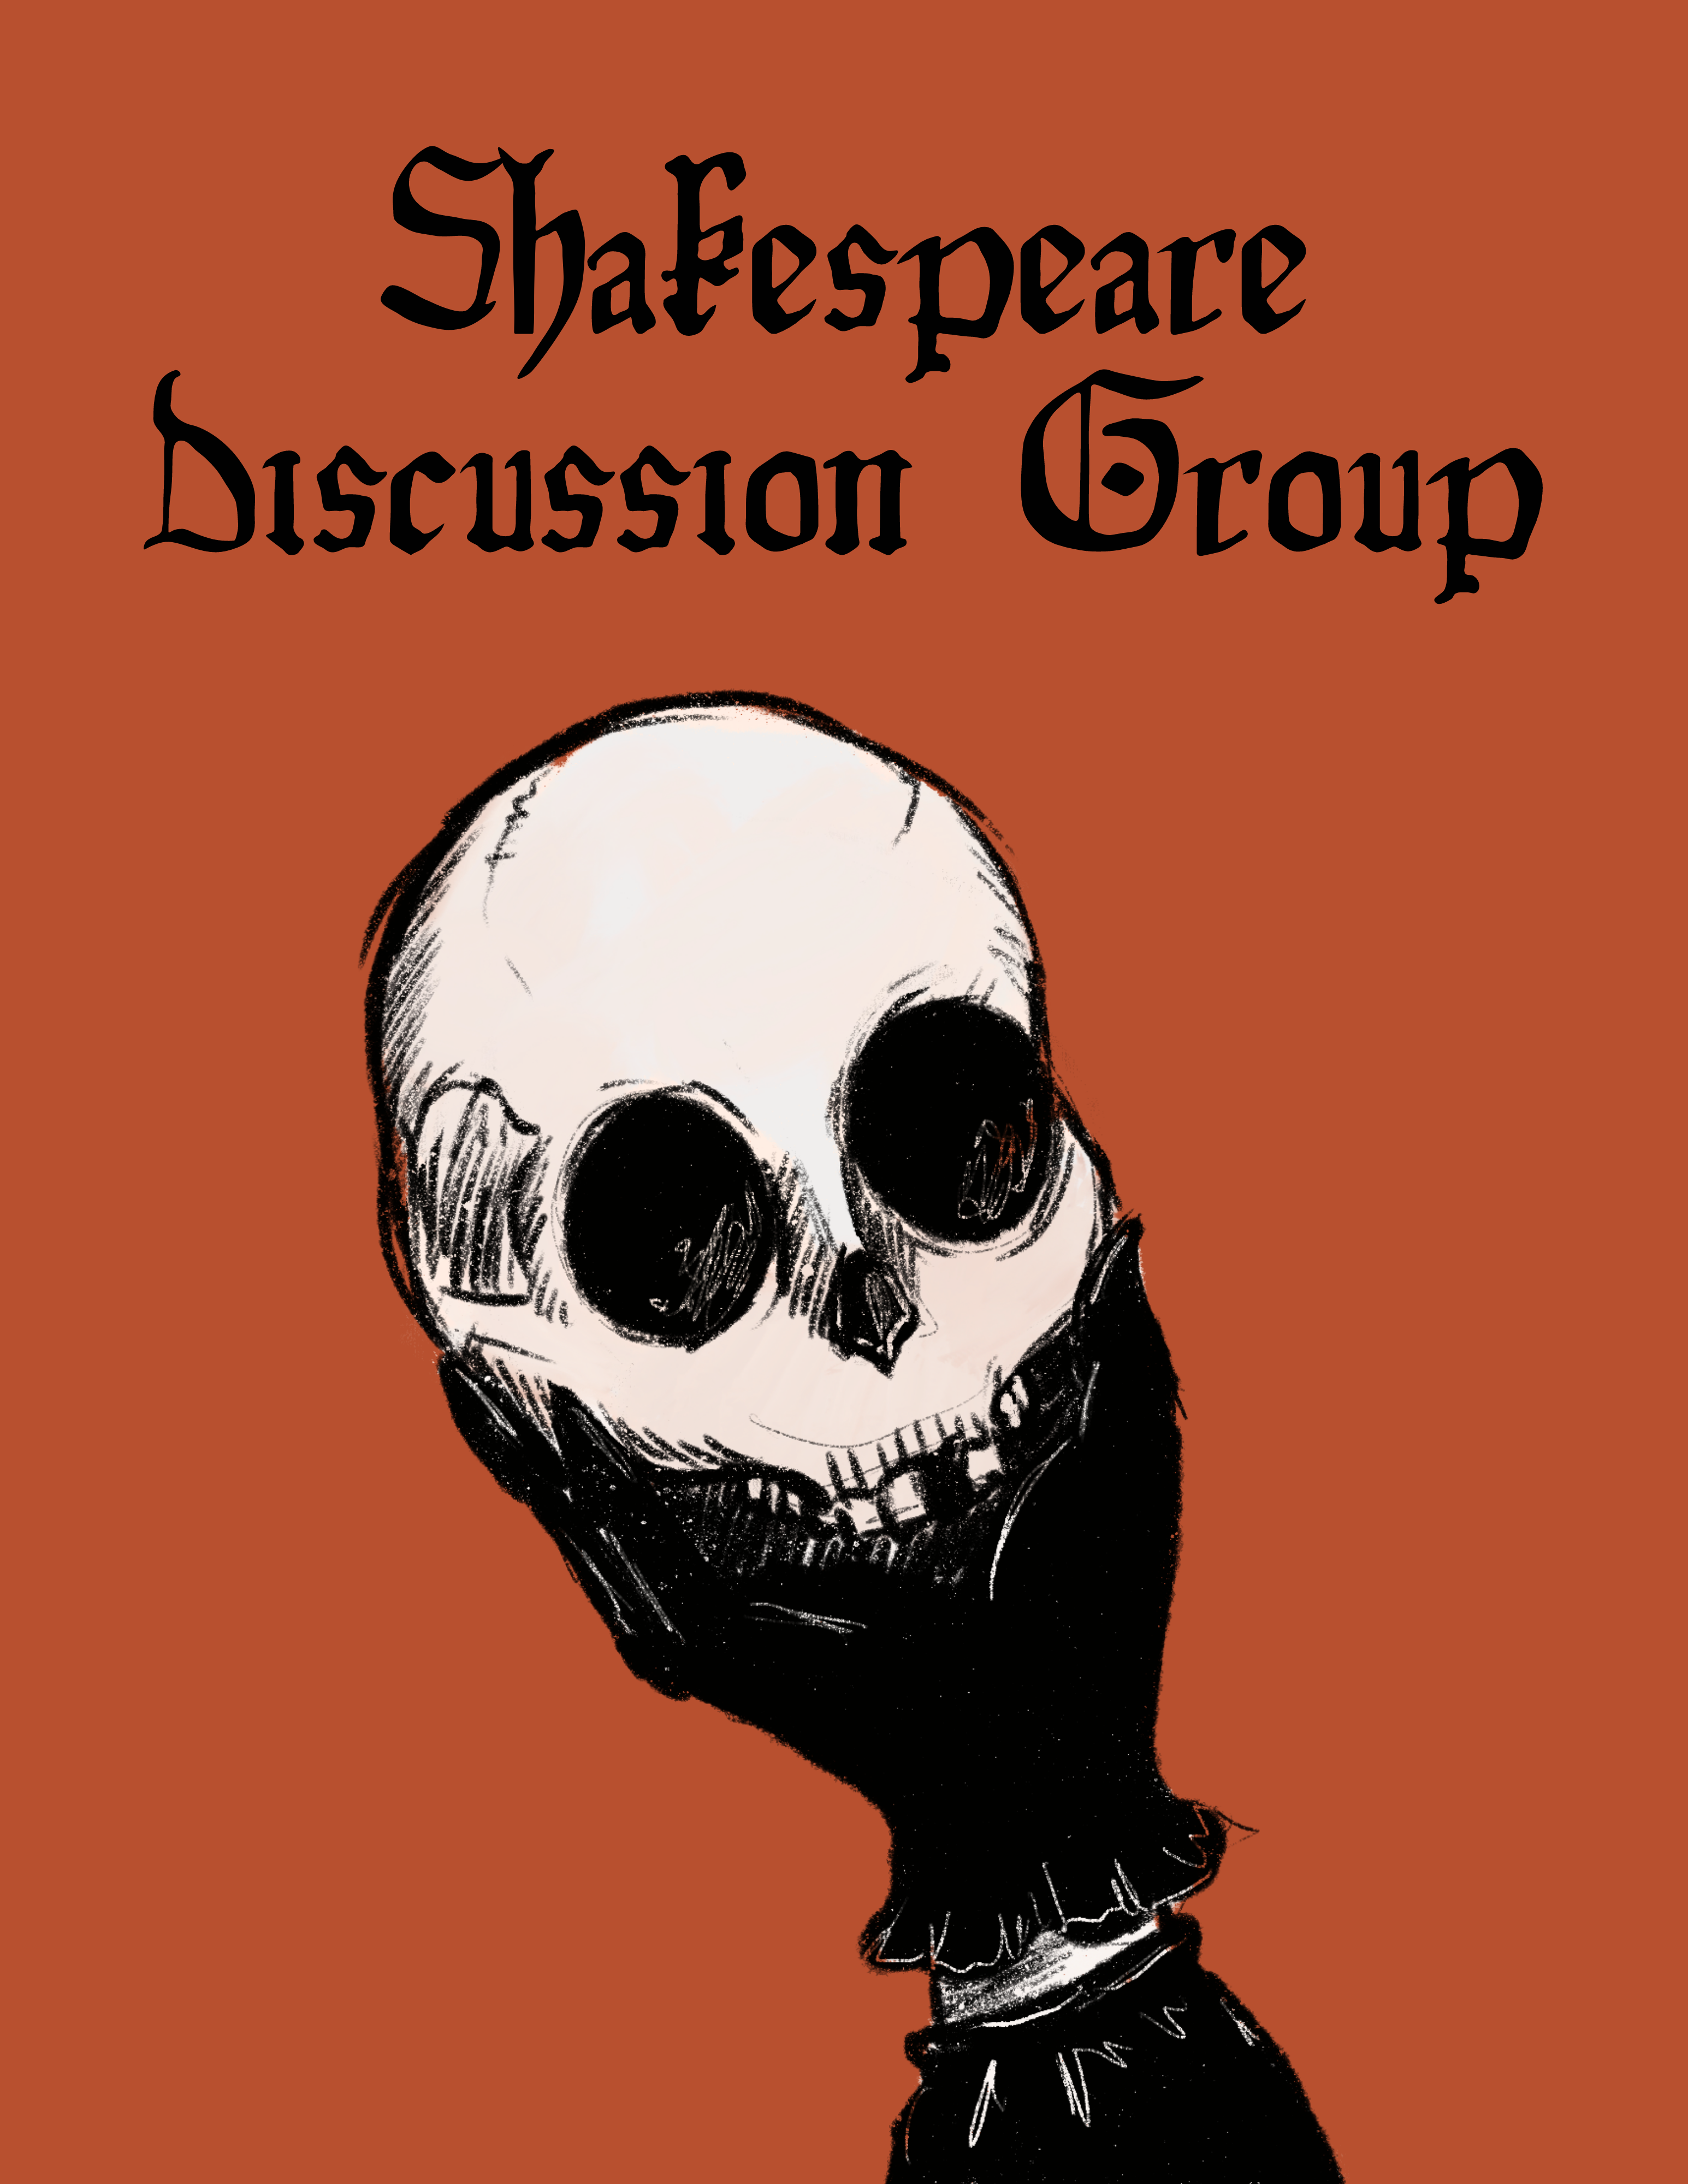 Shakespeare Discussion Group Human Skull Held by  Human Hand with Black Glove